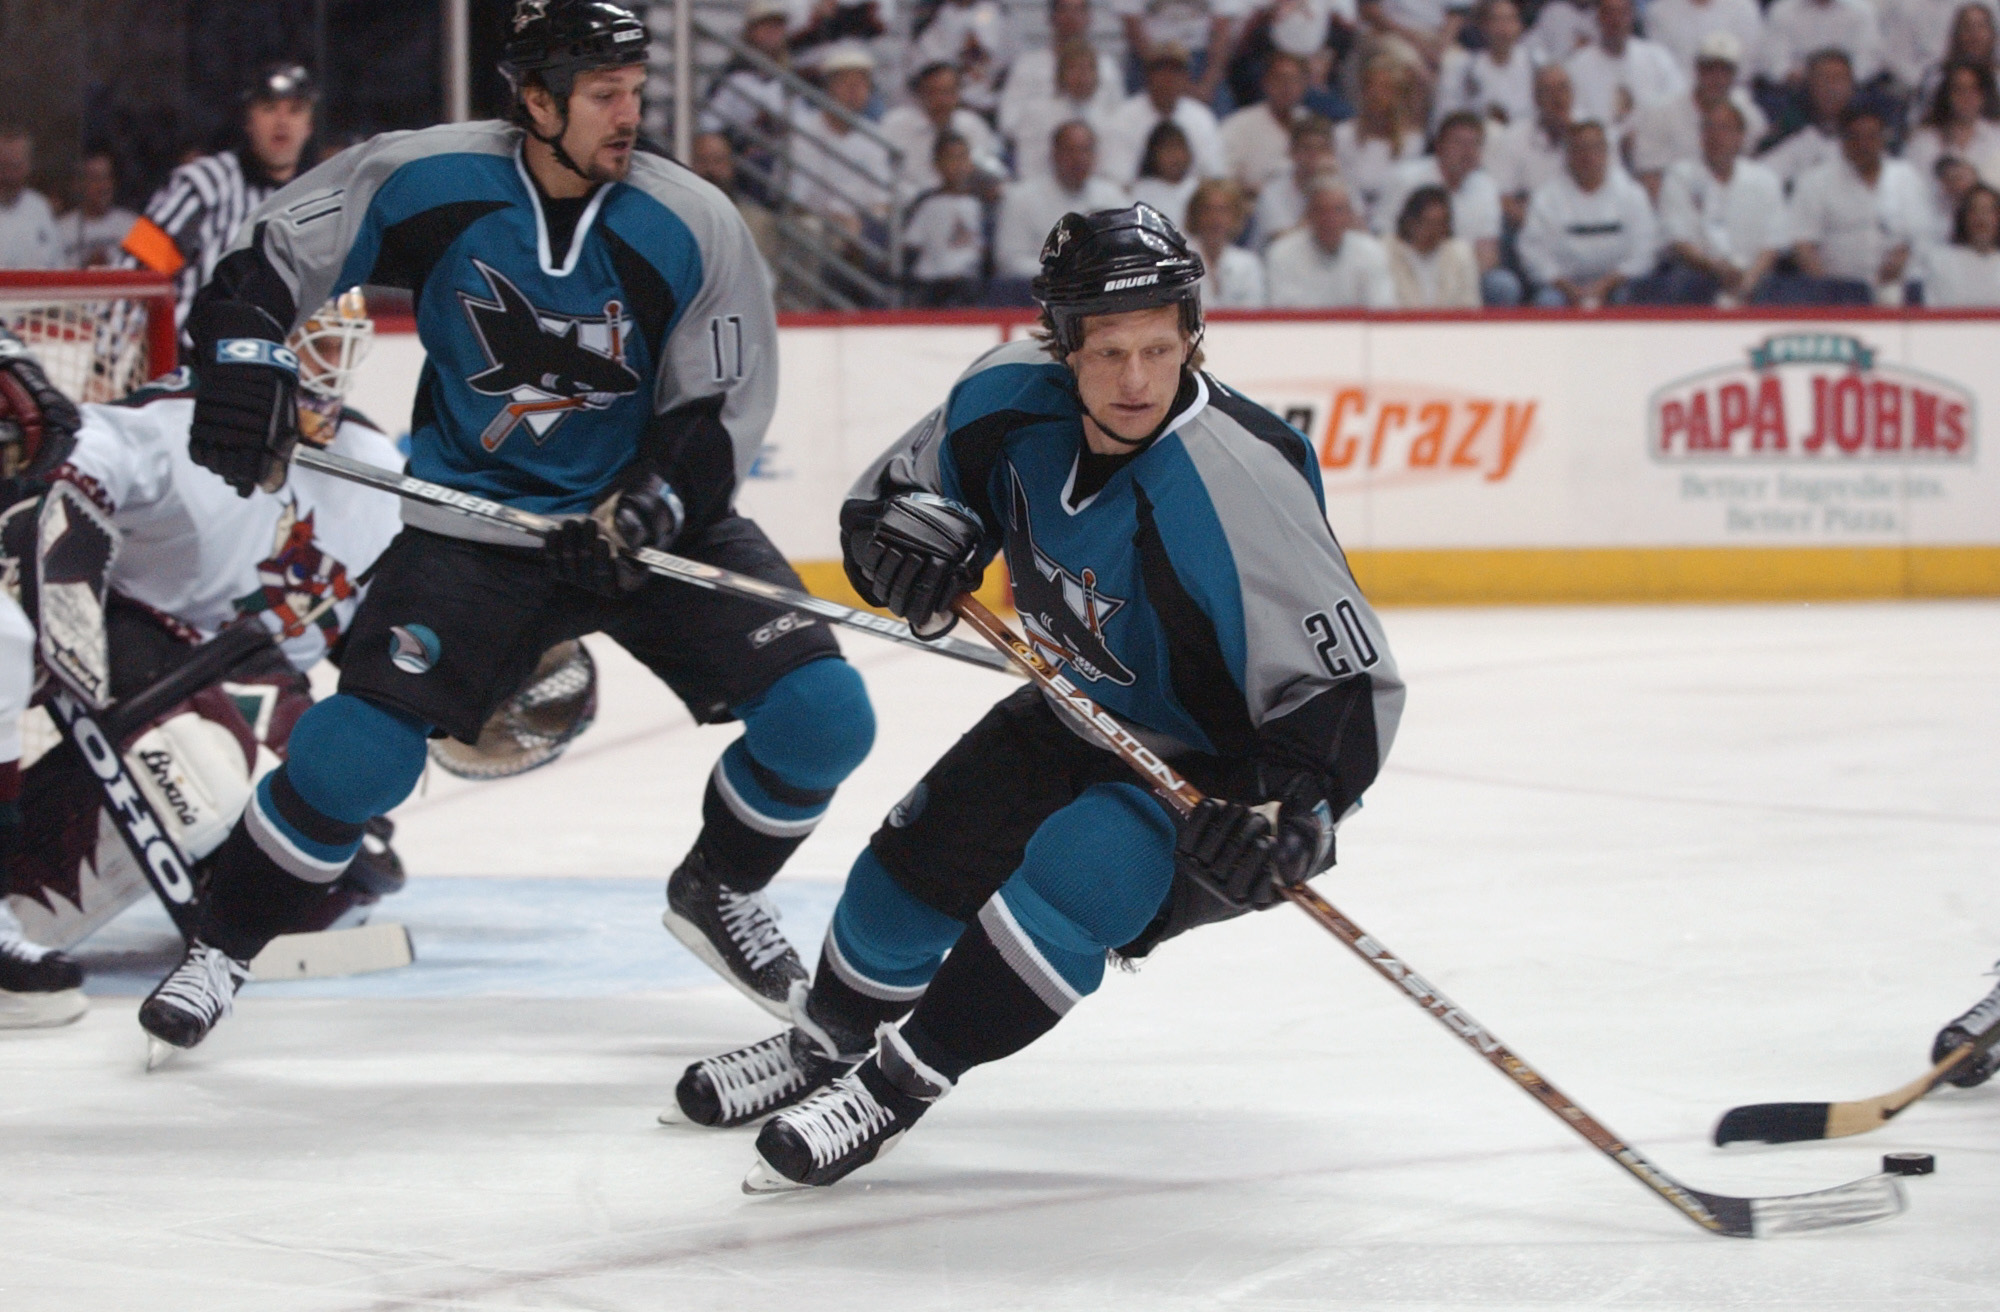 22 Apr 2002: Gary Suter #20 of the San Jose Sharks controls the puck against the Phoenix Coyotes during the game four of the Stanley Cup playoffs at America West Arena in Phoenix, Arizona. The Sharks won 4-1. DIGITAL IMAGE. Mandatory Credit: Harry How/Get